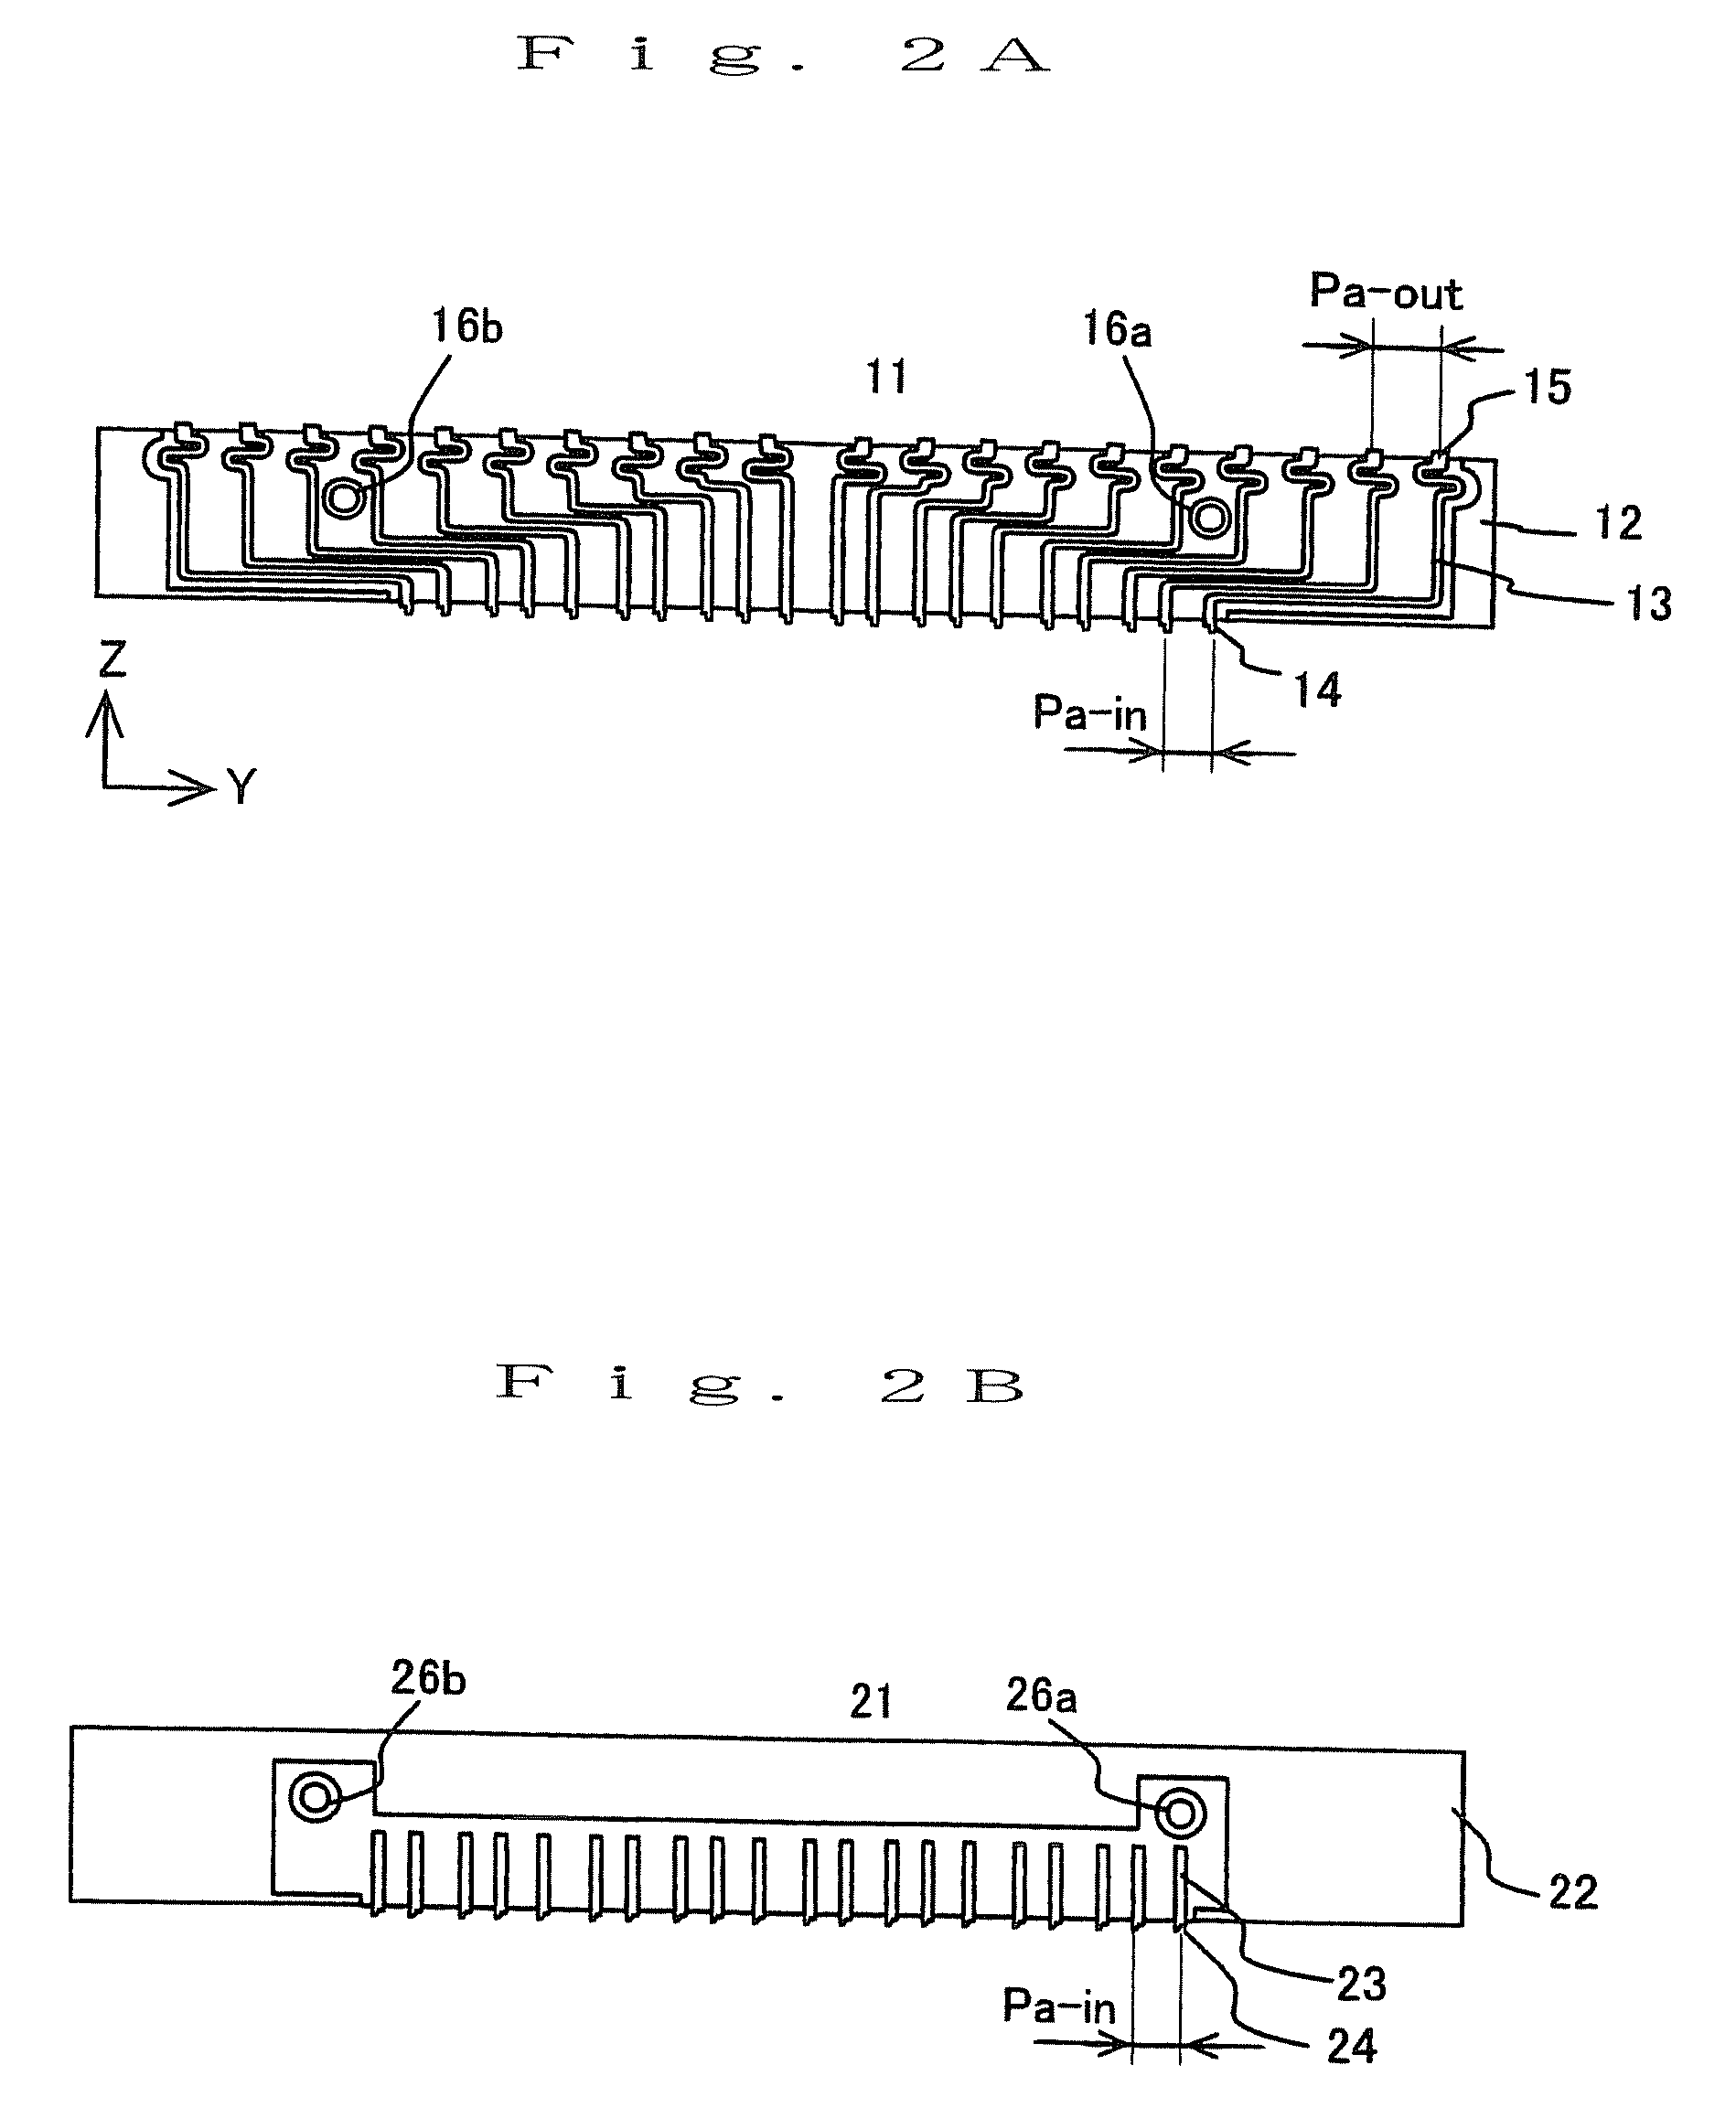 Coordinate Transformation Device For Electrical Signal Connection